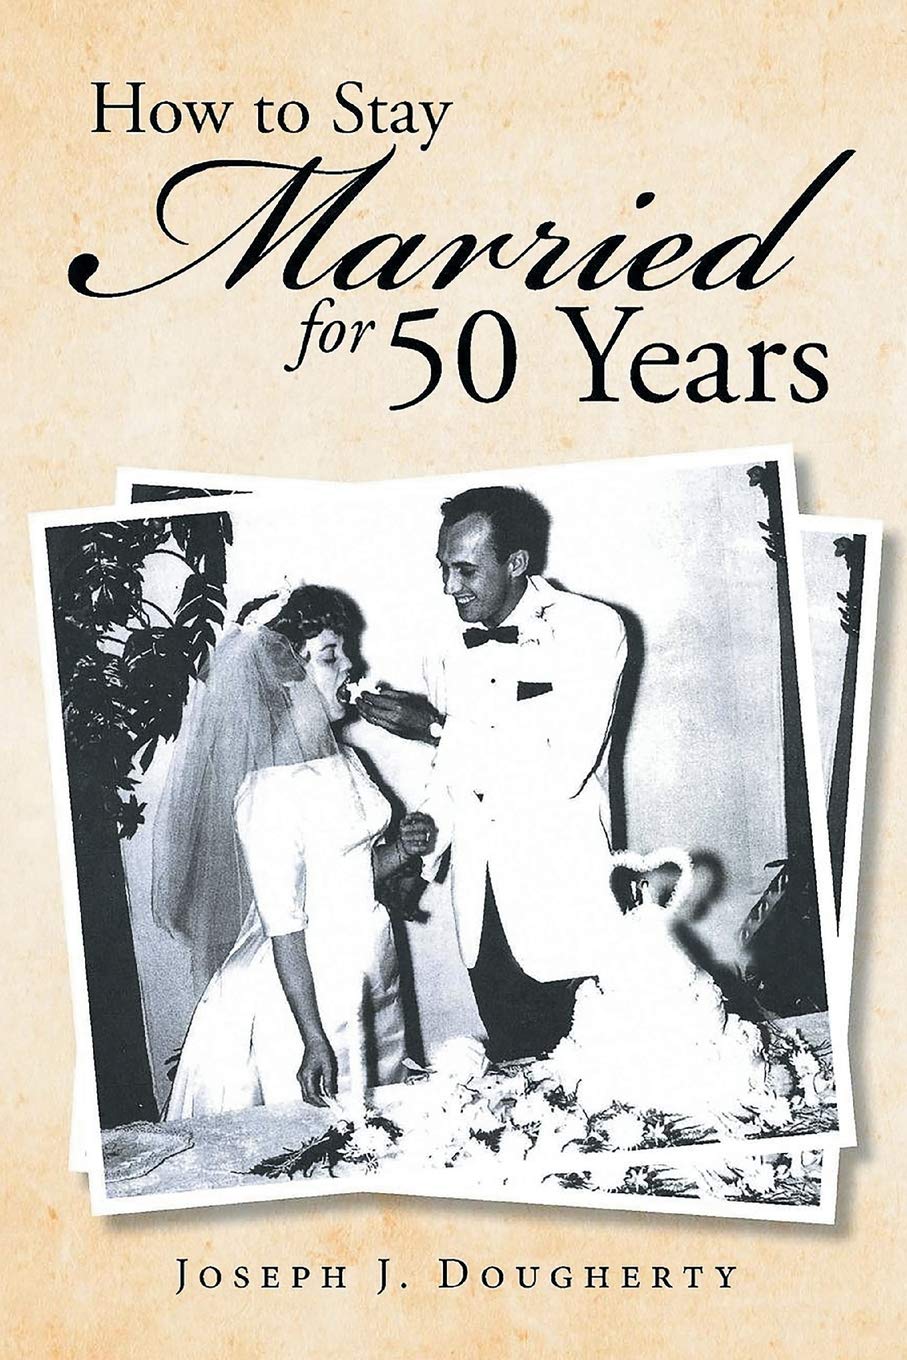 A Book About Staying Married for Years Now on Amazon